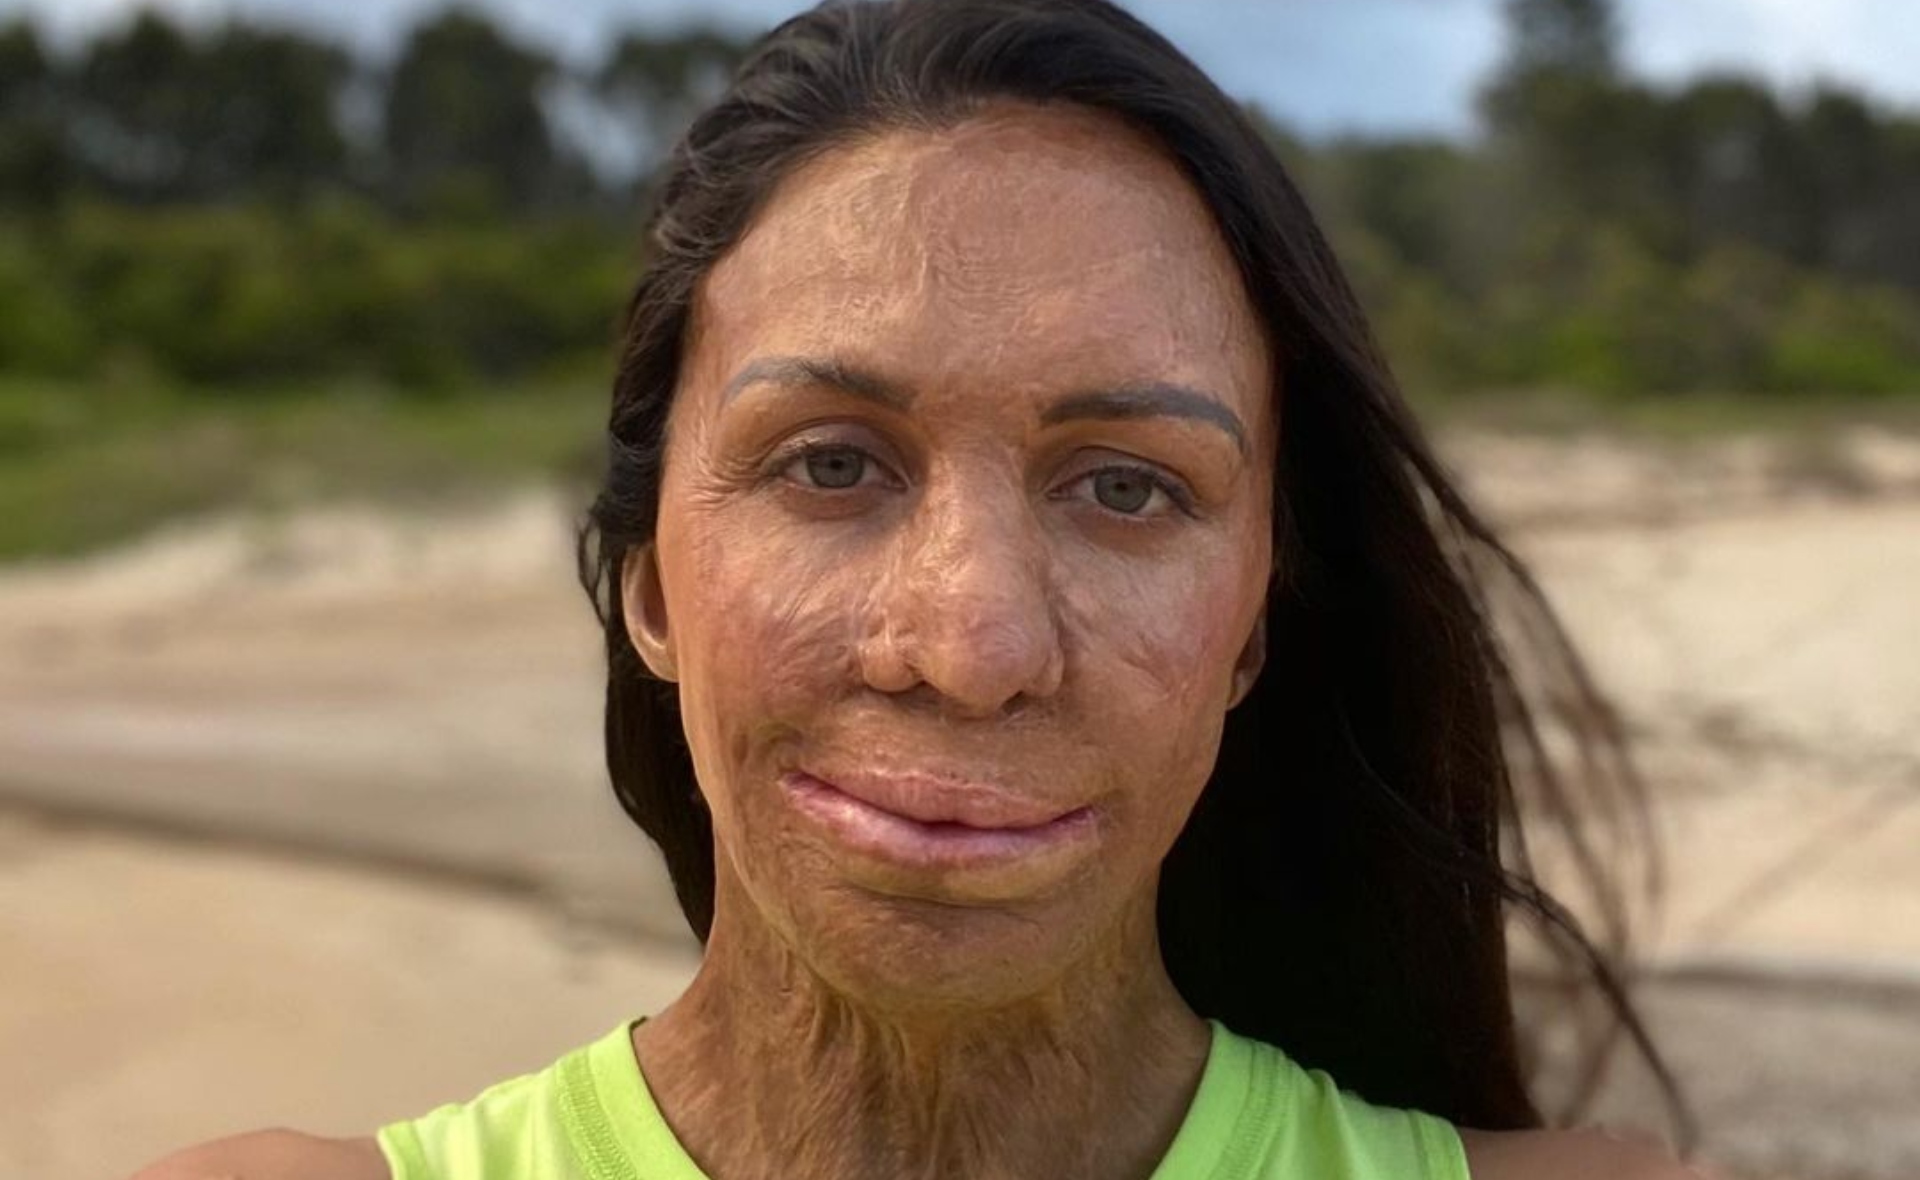 Turia Pitt is breaking down BS beauty standards – her groundbreaking new move is case in point